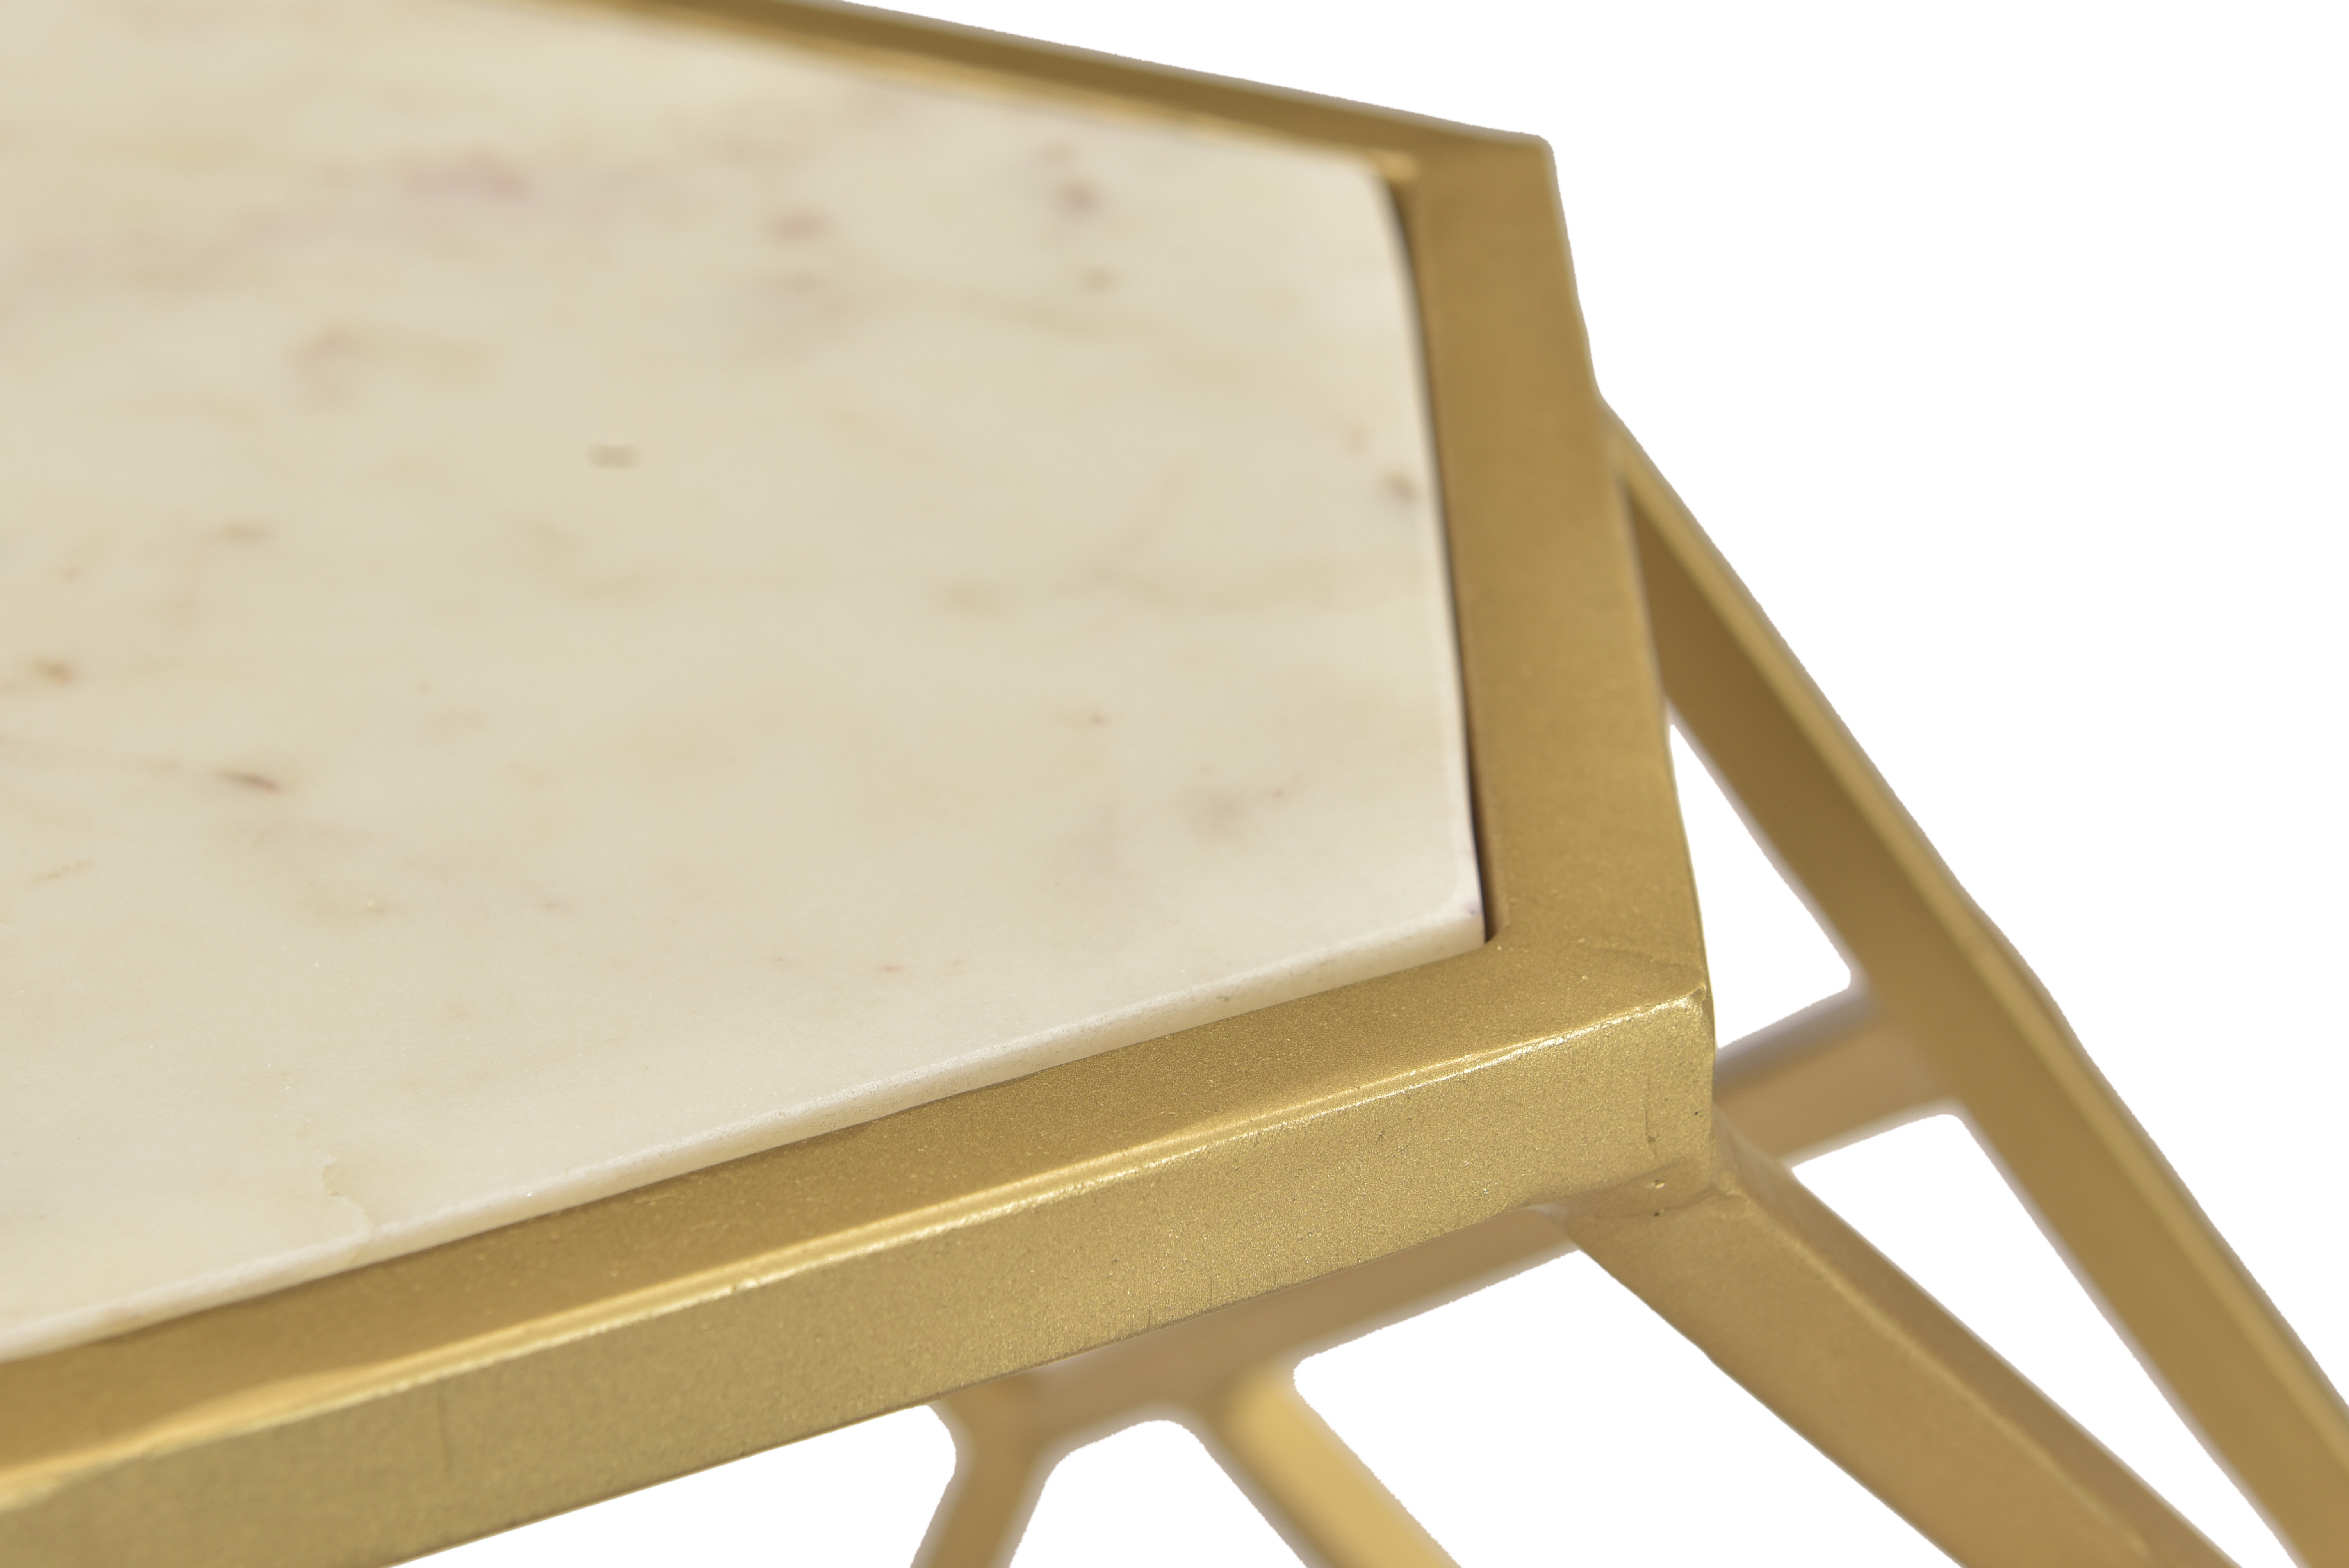 Hexagonal Accent Table - White Marble & Gold Powder Coat - Image 4